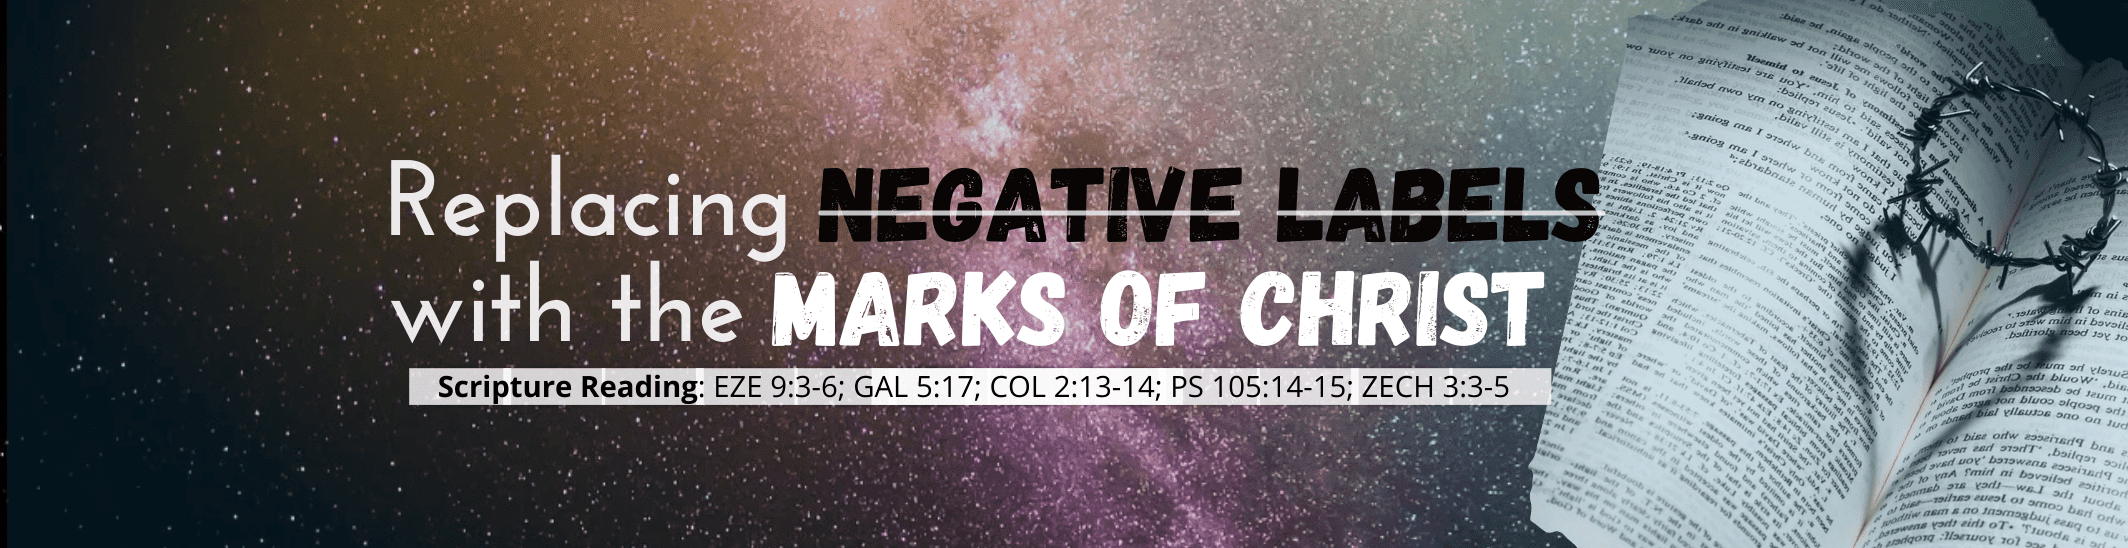 REPLACING NEGATIVE LABELS WITH THE MARKS OF CHRIST